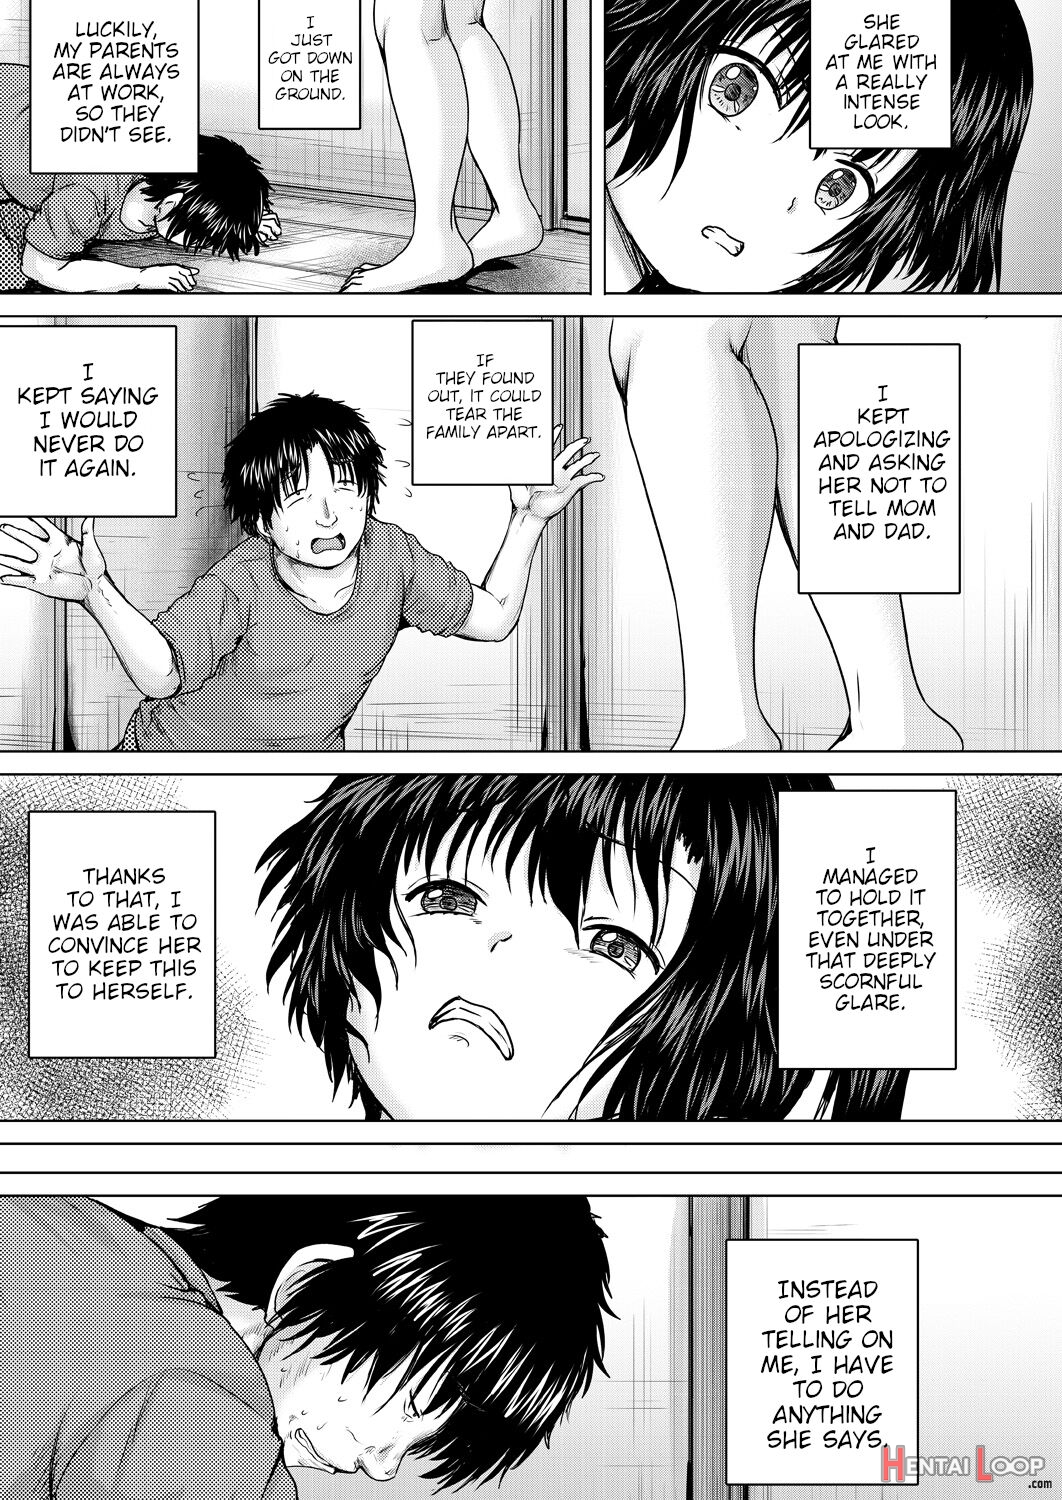 Leave It To Onii-chan Chapters 1-4 page 5